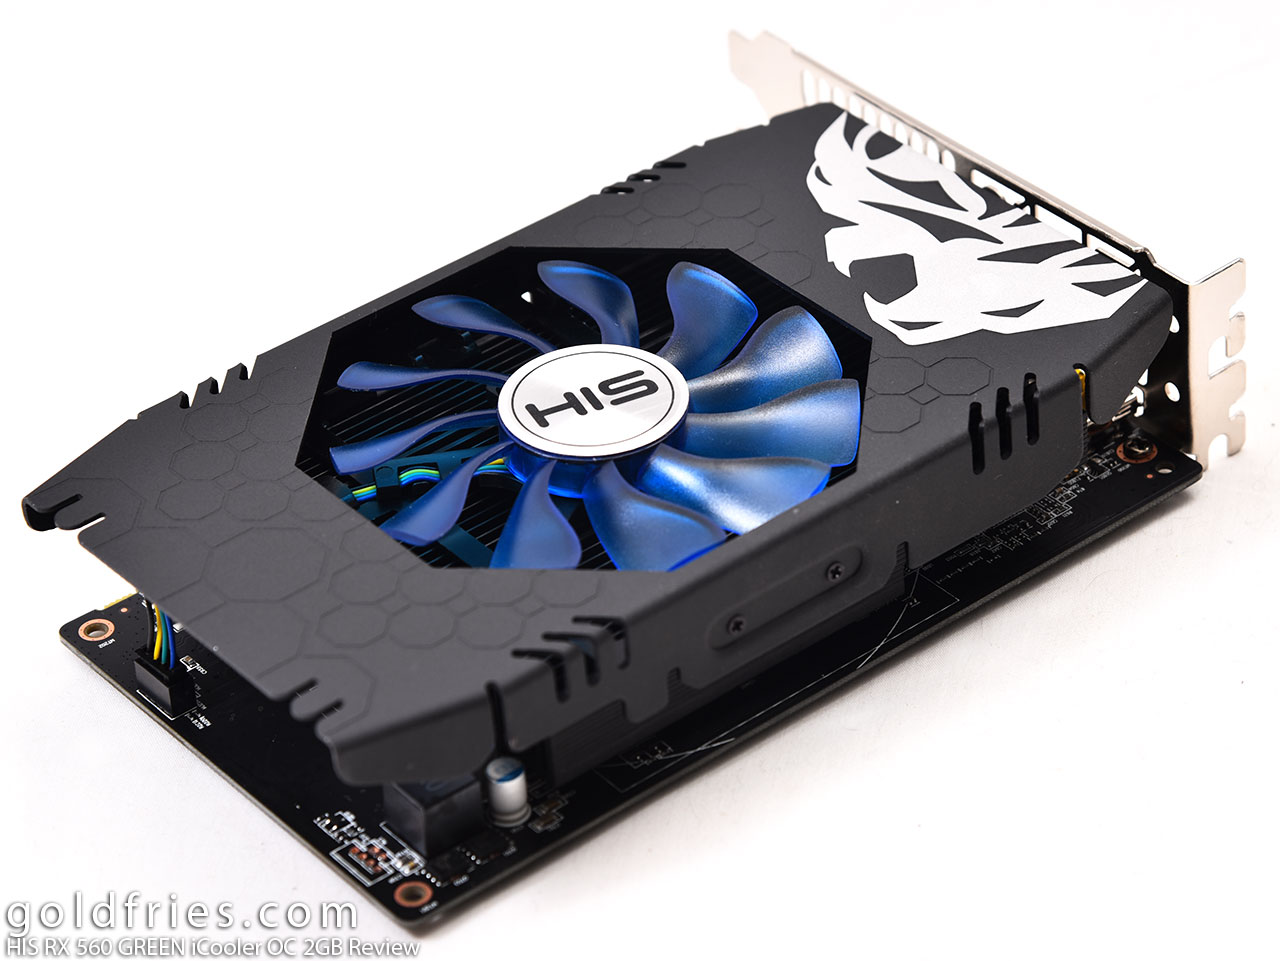 HIS RX 560 GREEN iCooler OC 2GB Review